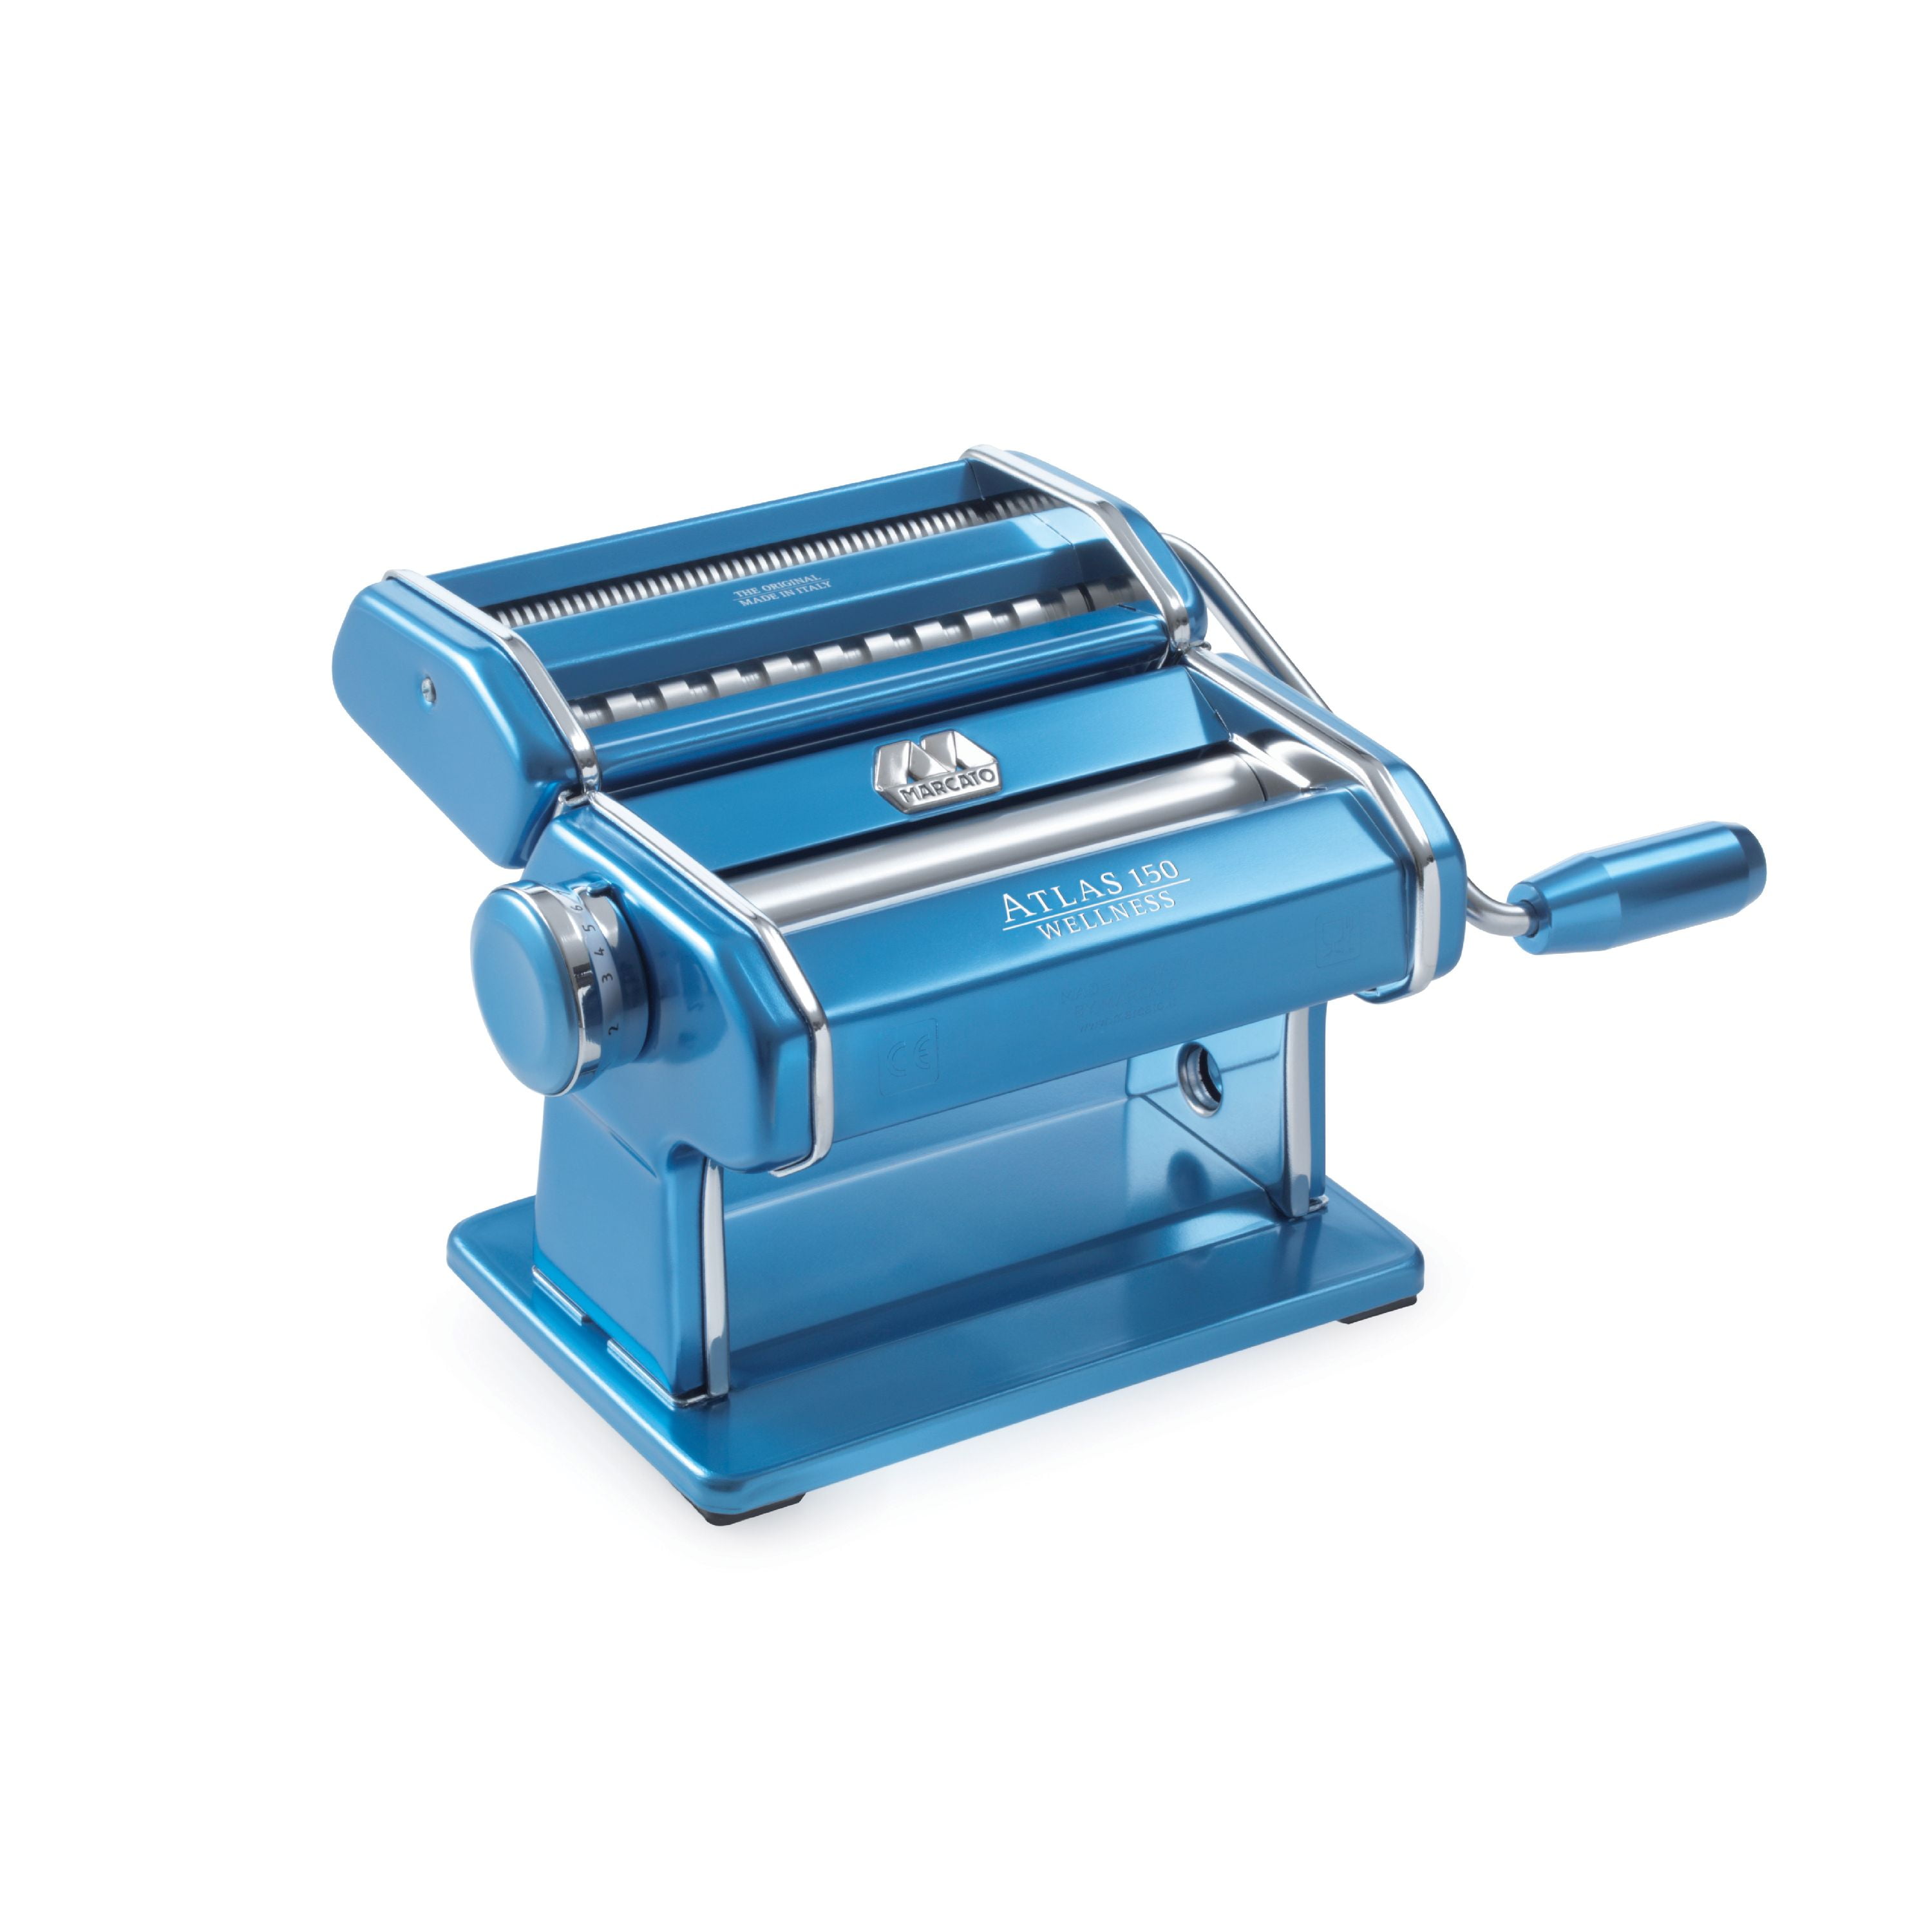 helemaal definitief pastel Marcato Atlas 150 Pasta Machine, Made in Italy, Red, Includes Pasta Cutter,  Hand Crank, and Instructions - Walmart.com